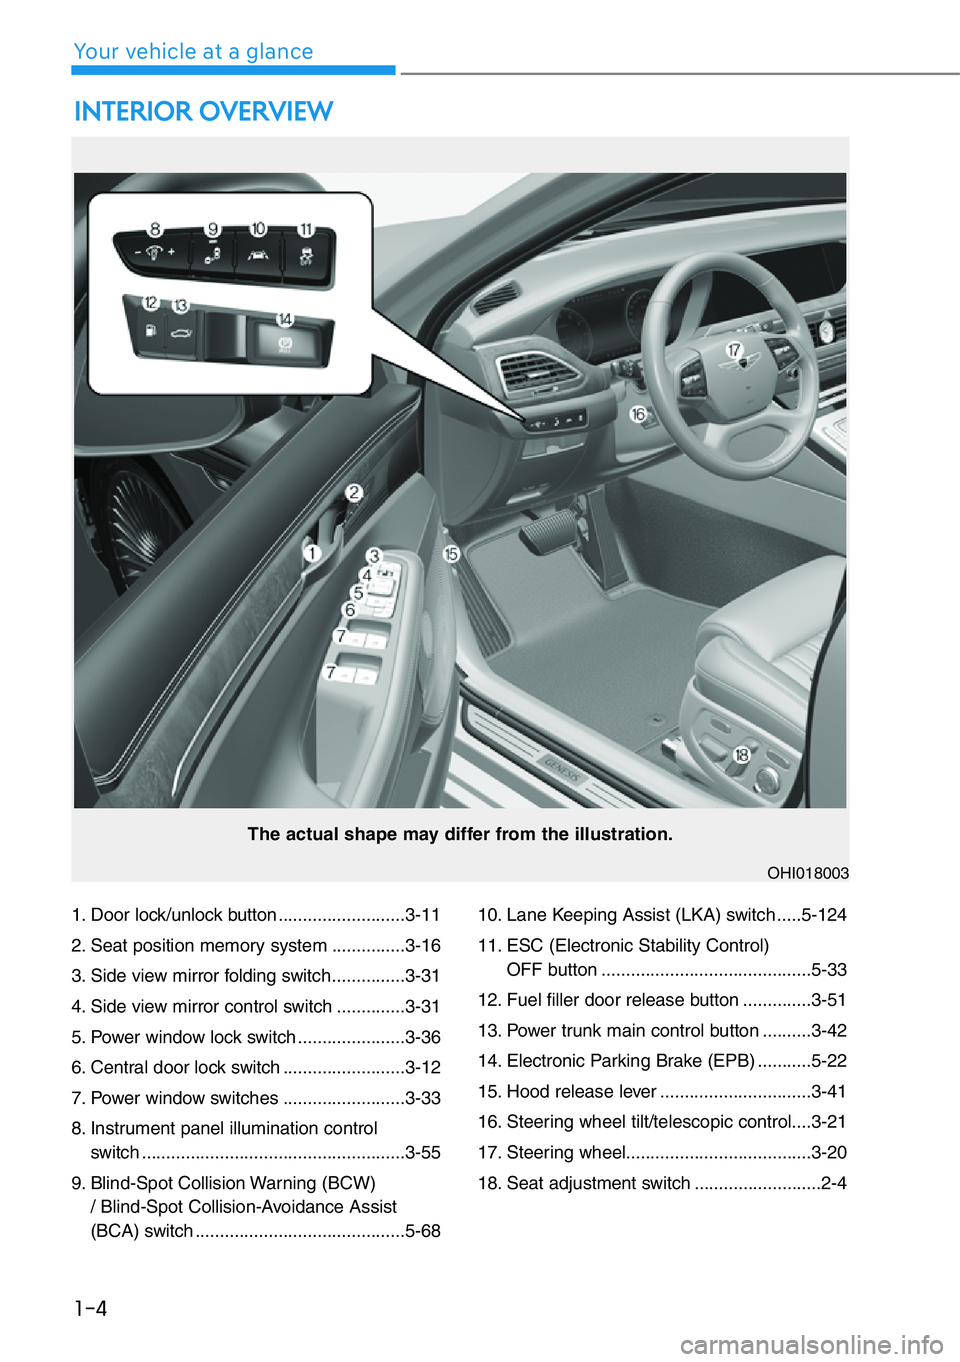 GENESIS G90 2021  Owners Manual 1. Door lock/unlock button ..........................3-11
2. Seat position memory system ...............3-16
3. Side view mirror folding switch ...............3-31
4. Side view mirror control switch .